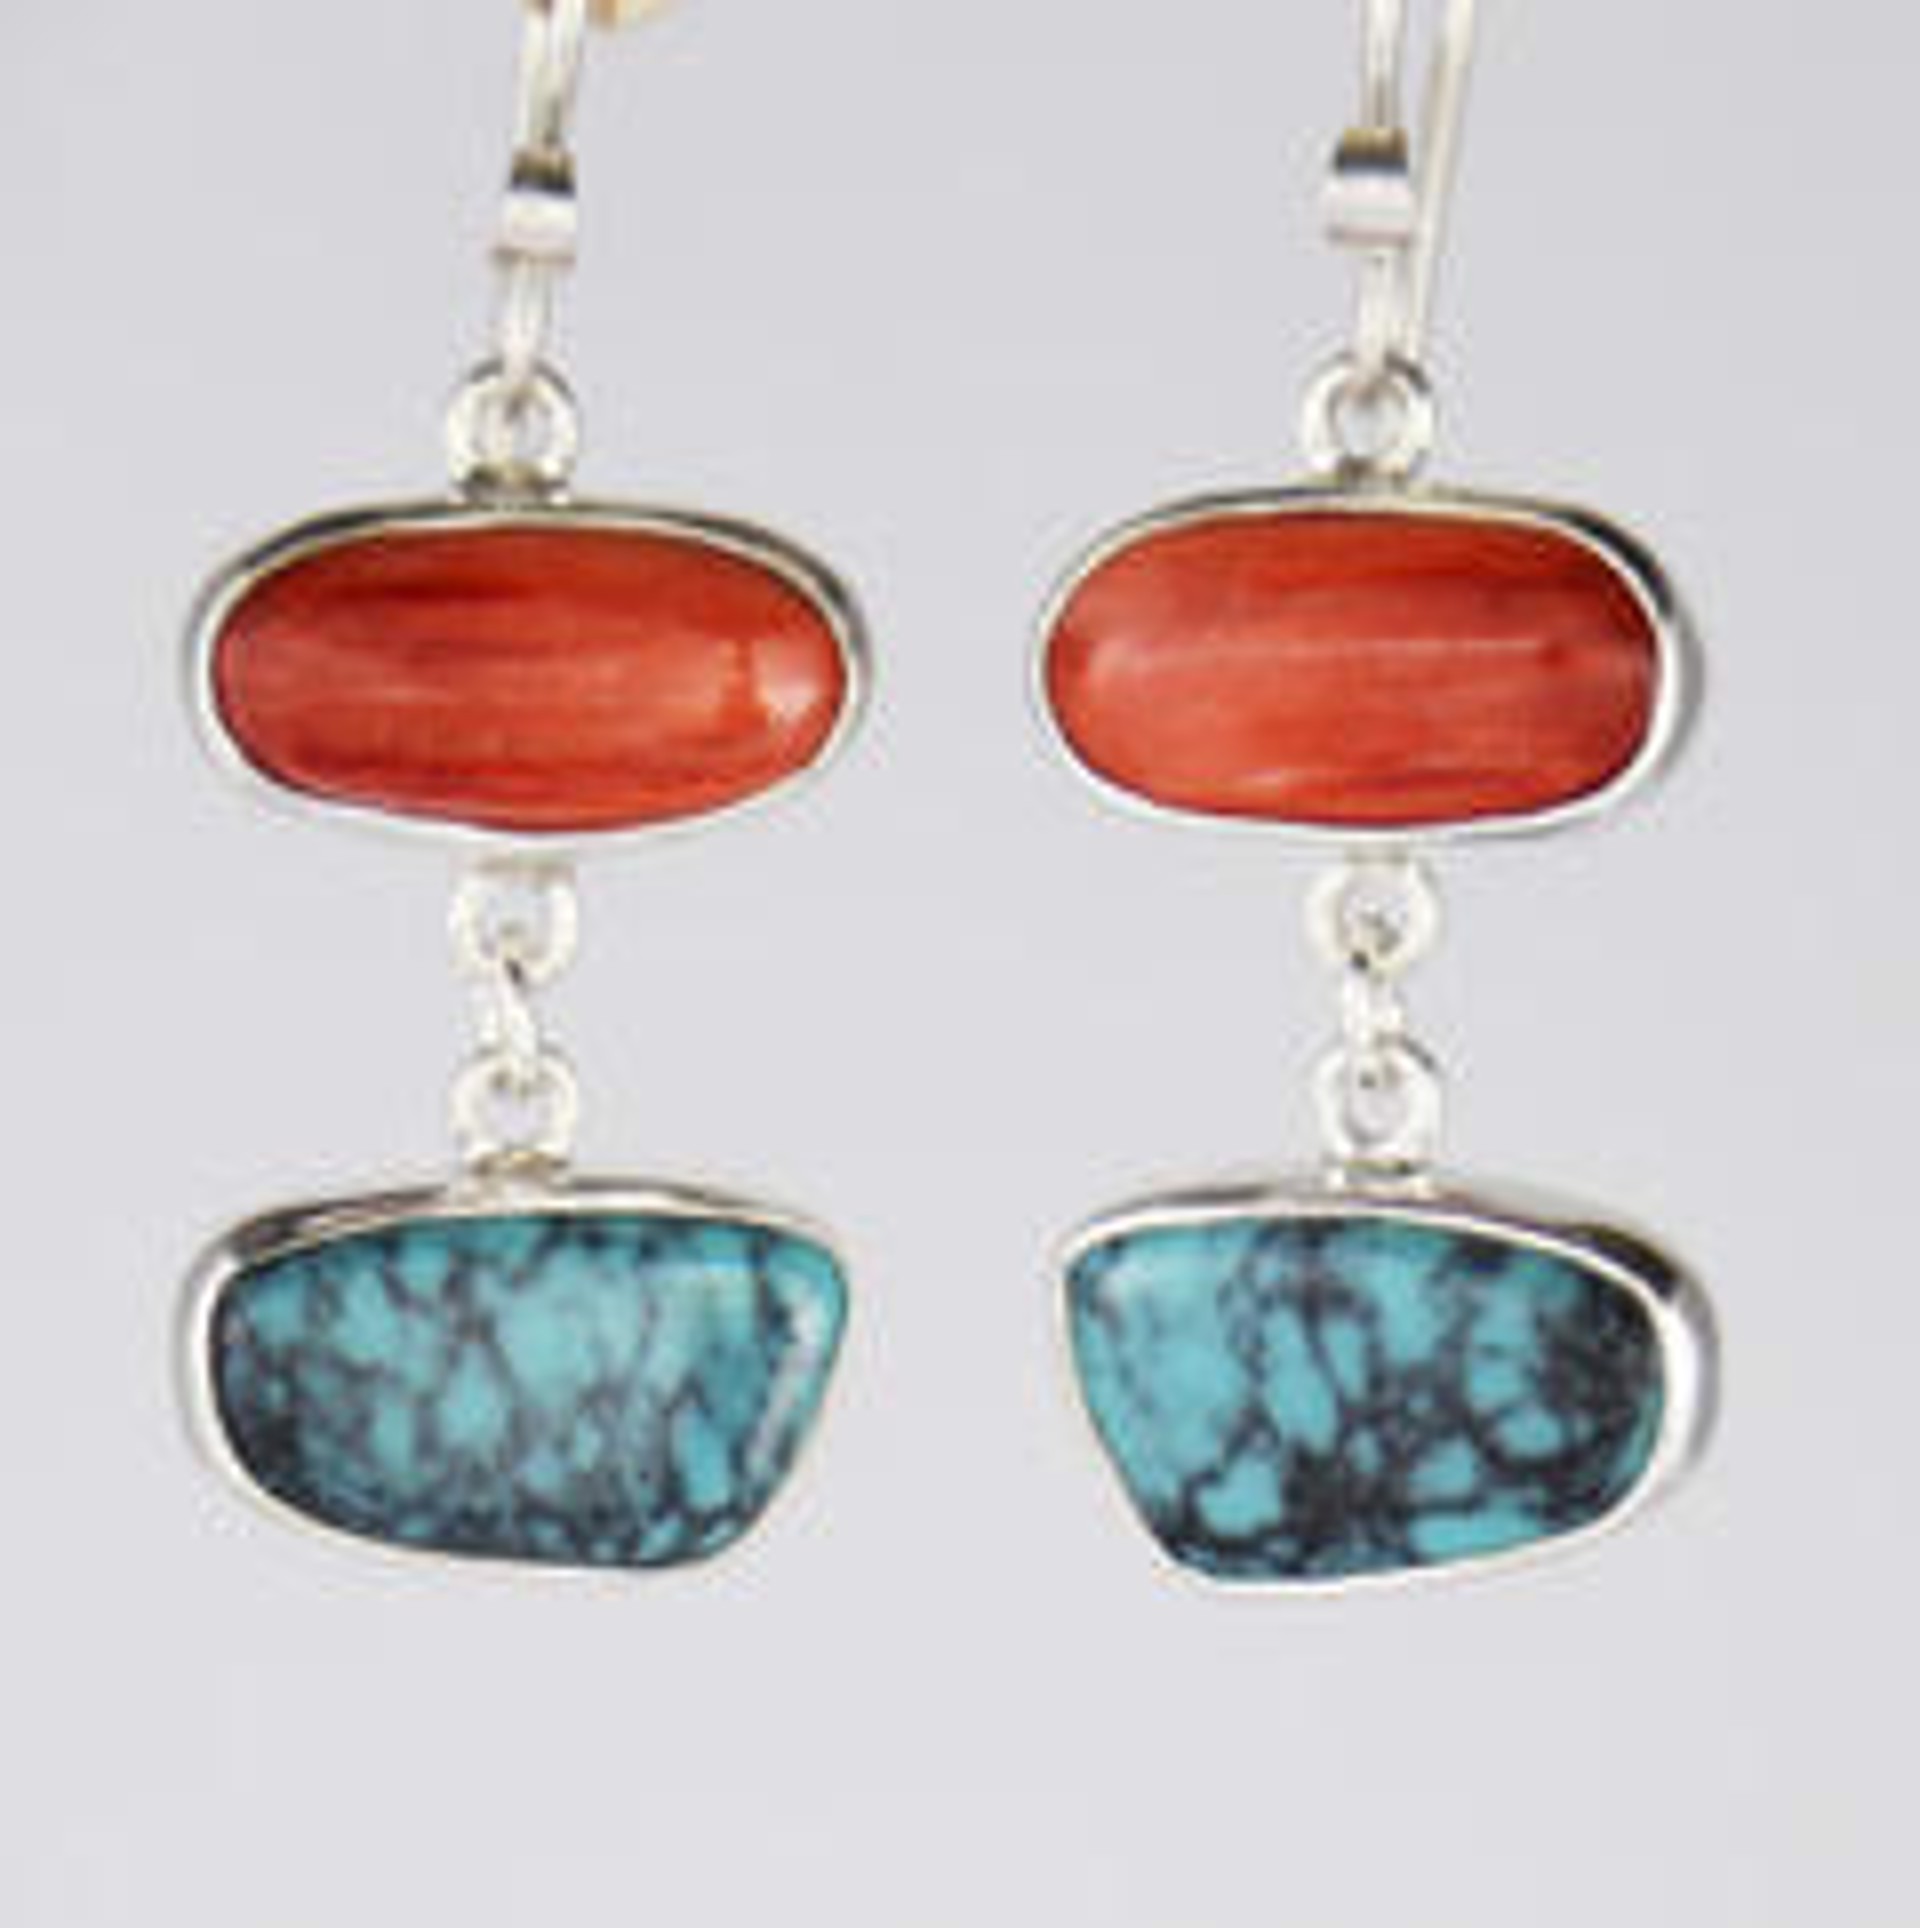 Earrings - Sterling Silver With Spiny Oyster & Tibetian Turquoise - 466 by Ken and Barbara Newman